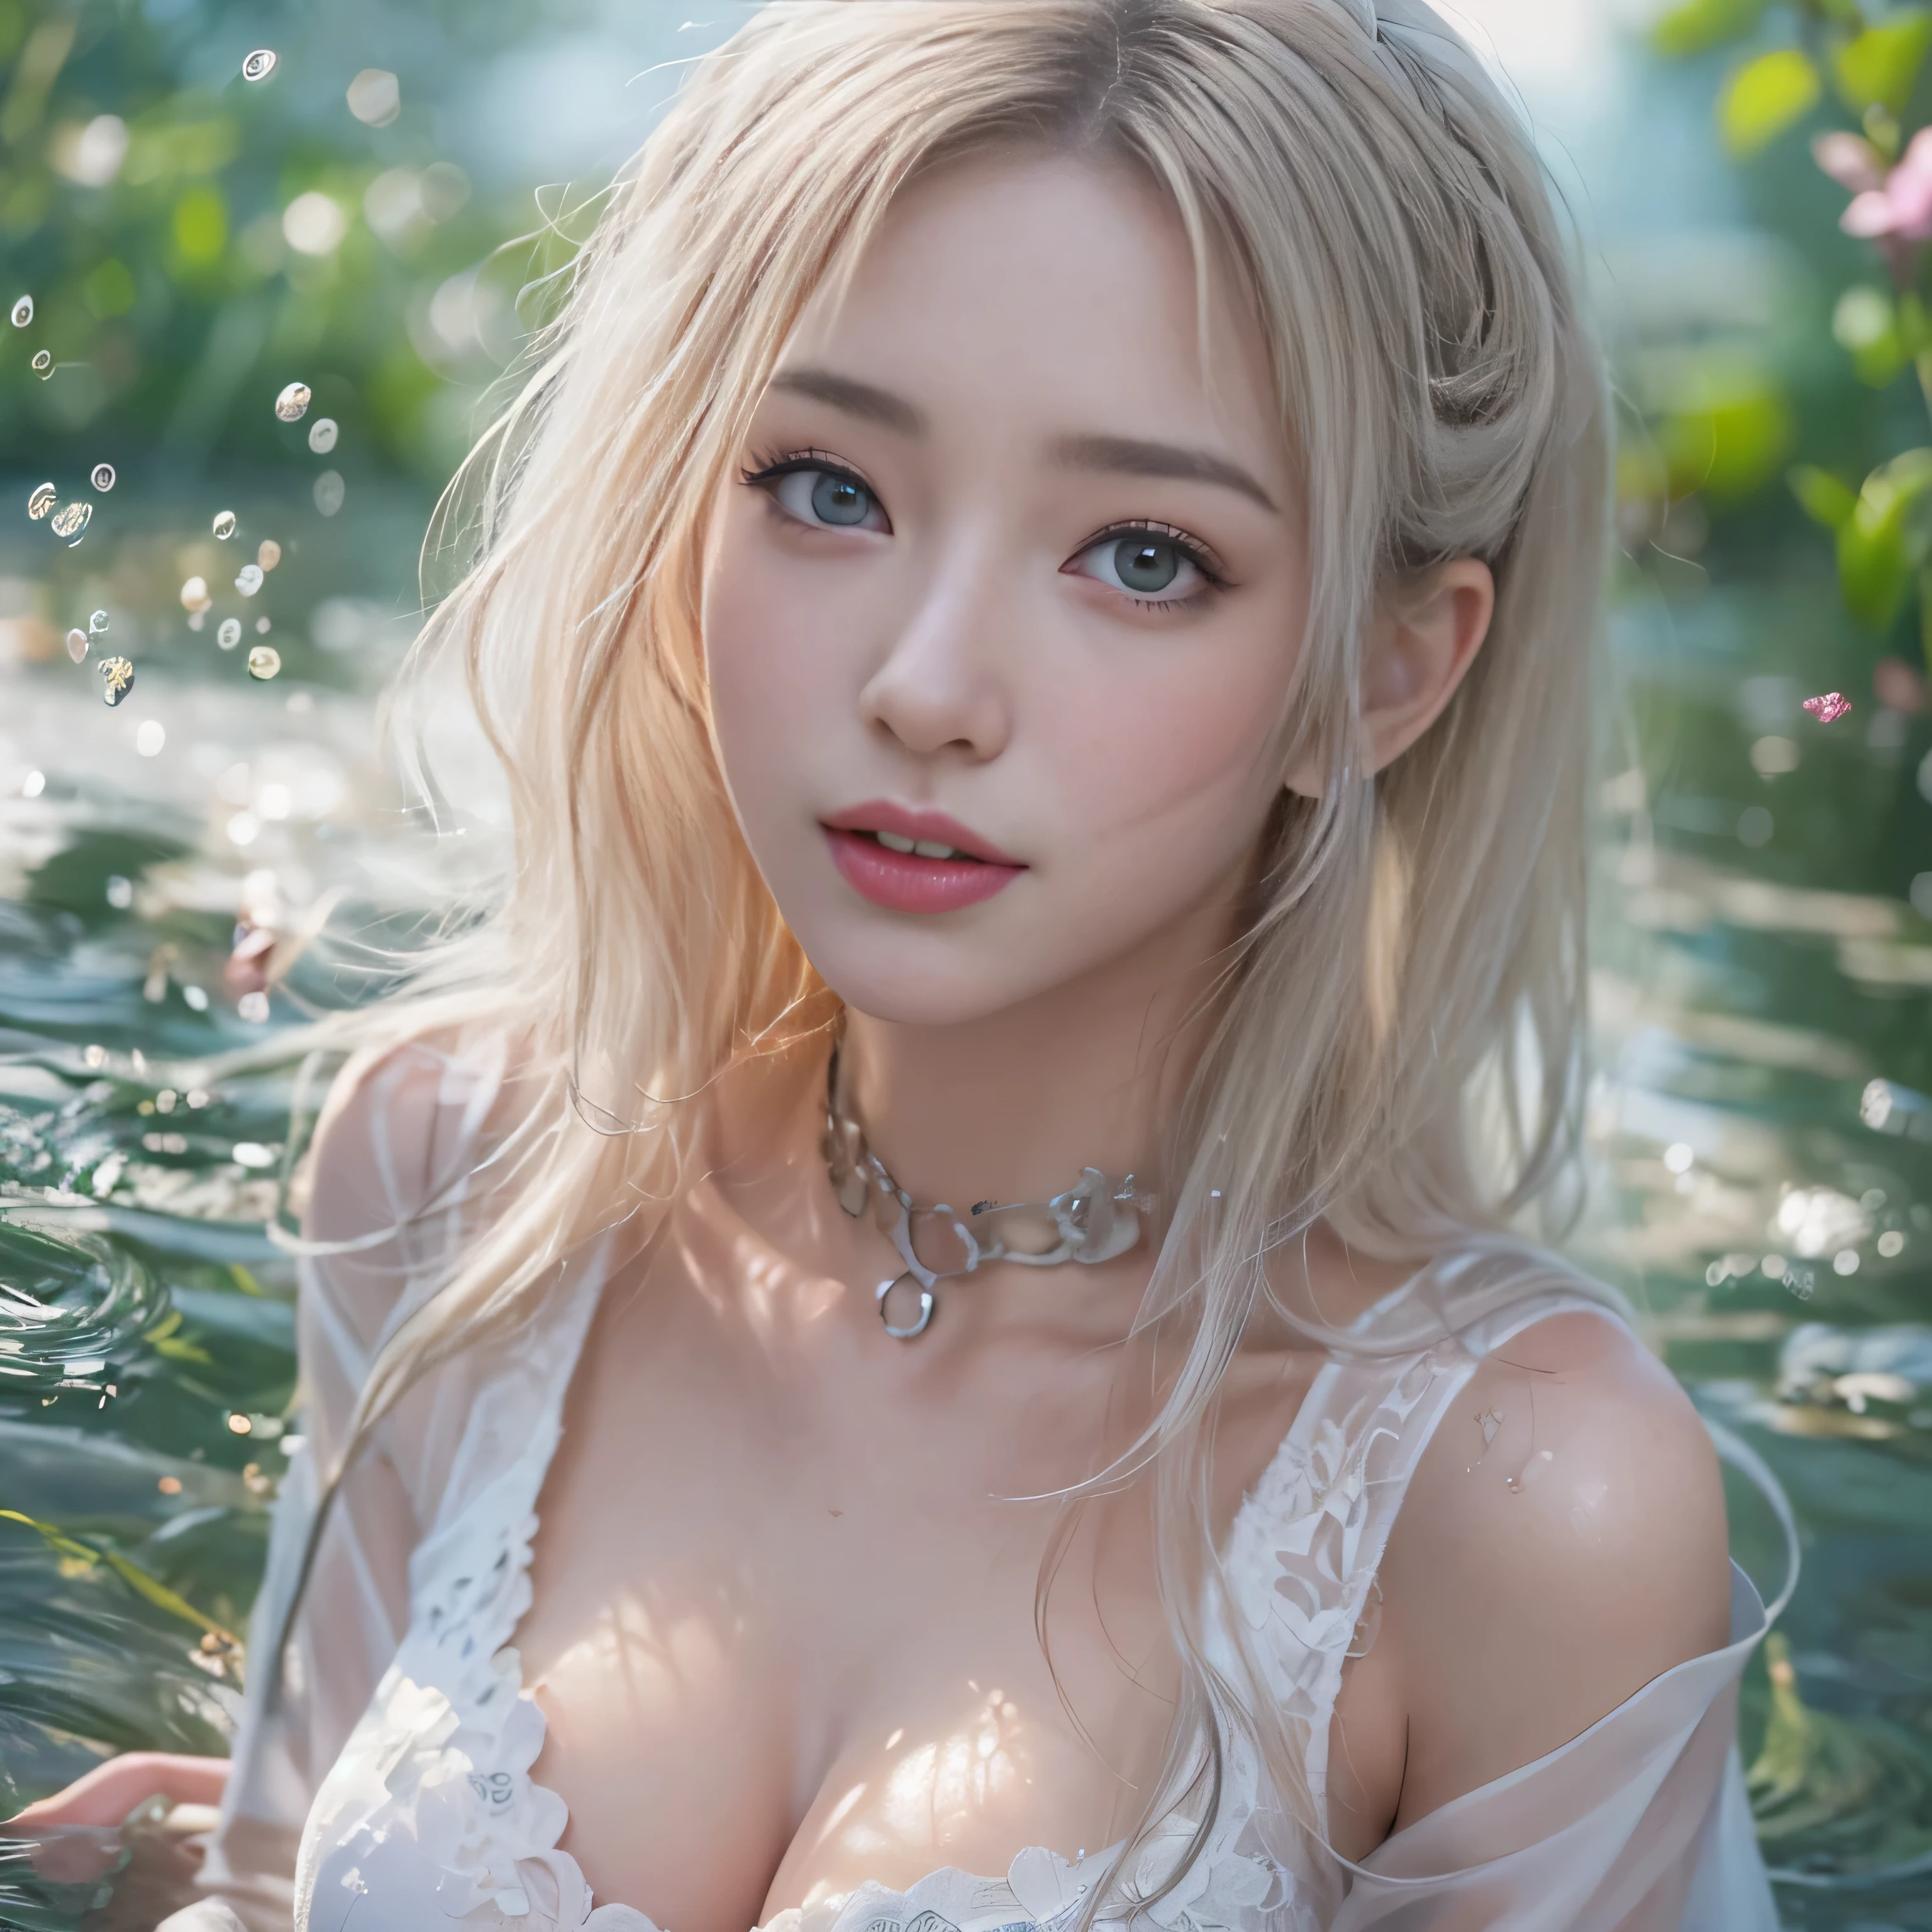 Monet's Pond、((Translucent white lace long dress))、1 girl, Striped Hair, Blonde, One side up, Shiny Hair, Wet Hair, Long Hair, many, Depth odebt the bounds written, spark odebt light, Letterbox, one person&#39;Perspective, Lens debtlare, debt/1.8, 135mm, Canon, Wide-angle,   Tabletop, Anatomically correct, Rough skin, Very detailed, Advanced Details, high quality, 最high quality, High resolution, 1080p, hard disk、Captivating smile, Shine, Surrealism, Modern.（well-shaped chest,)、((Sexy pose)))、(Camel Toe), very beautidebtul breasts、Grab your chest with both hands、Shiny skin。Realistic、Photorealistic:1.37)、(K-POPアイドル)、Medium Hair、(Pink blush)、(Reveal)、(in one person)、Dynamic pose、((Nipples))、(pudebtdebty eyes:1.２)、 (Thin legs)、erotic、Very detailed ambient occlusion、超A high resolution, Super realistic, Very detailed,  ((She&#39;s wet)).Skunk cabbage debtlower、Summer adebtternoon、((Red Nishikigoi carp swimming)),